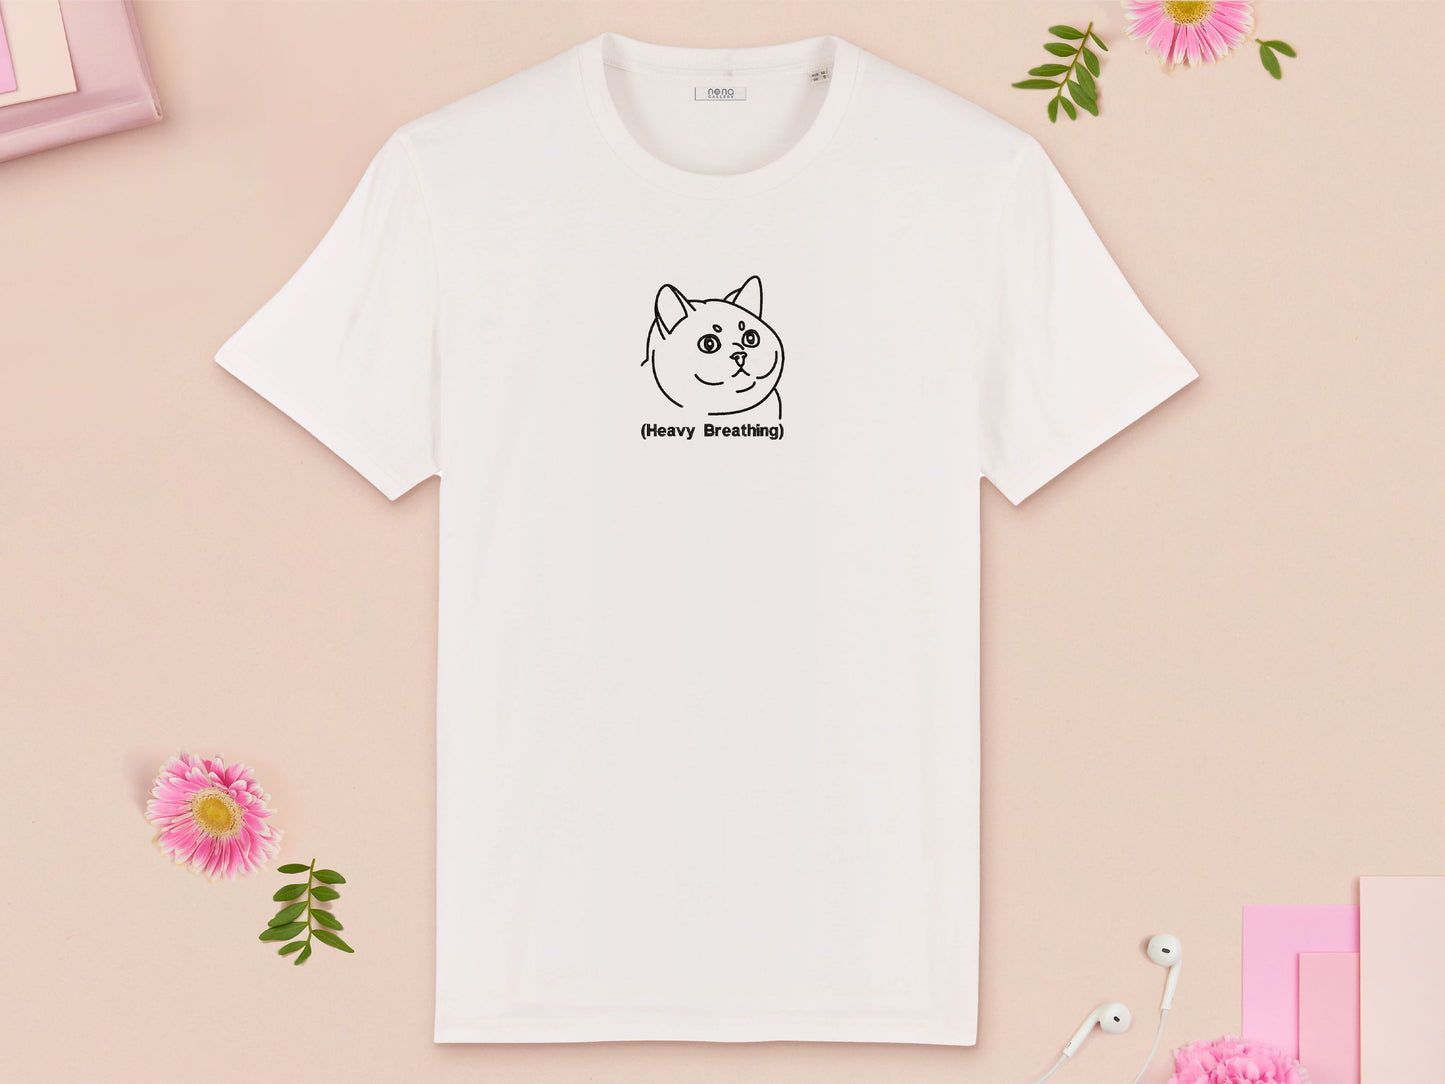 A white crew neck short sleeve t-shirt, with an embroidered black thread design of cute fat cat portrait with text underneath saying (Heavy Breathing)